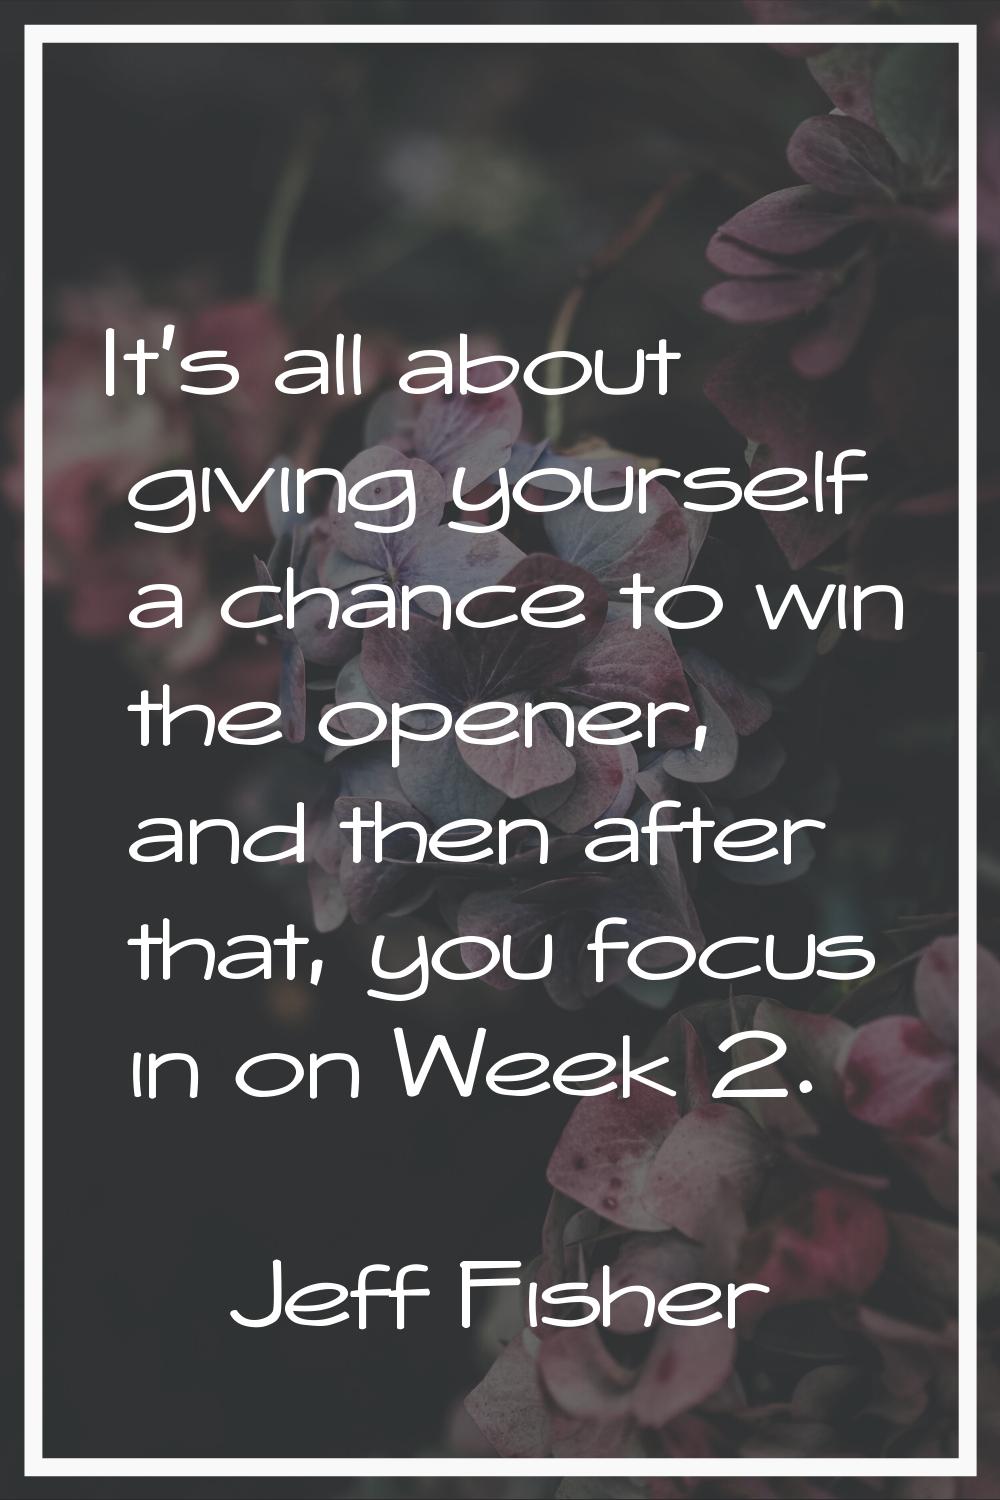 It's all about giving yourself a chance to win the opener, and then after that, you focus in on Wee